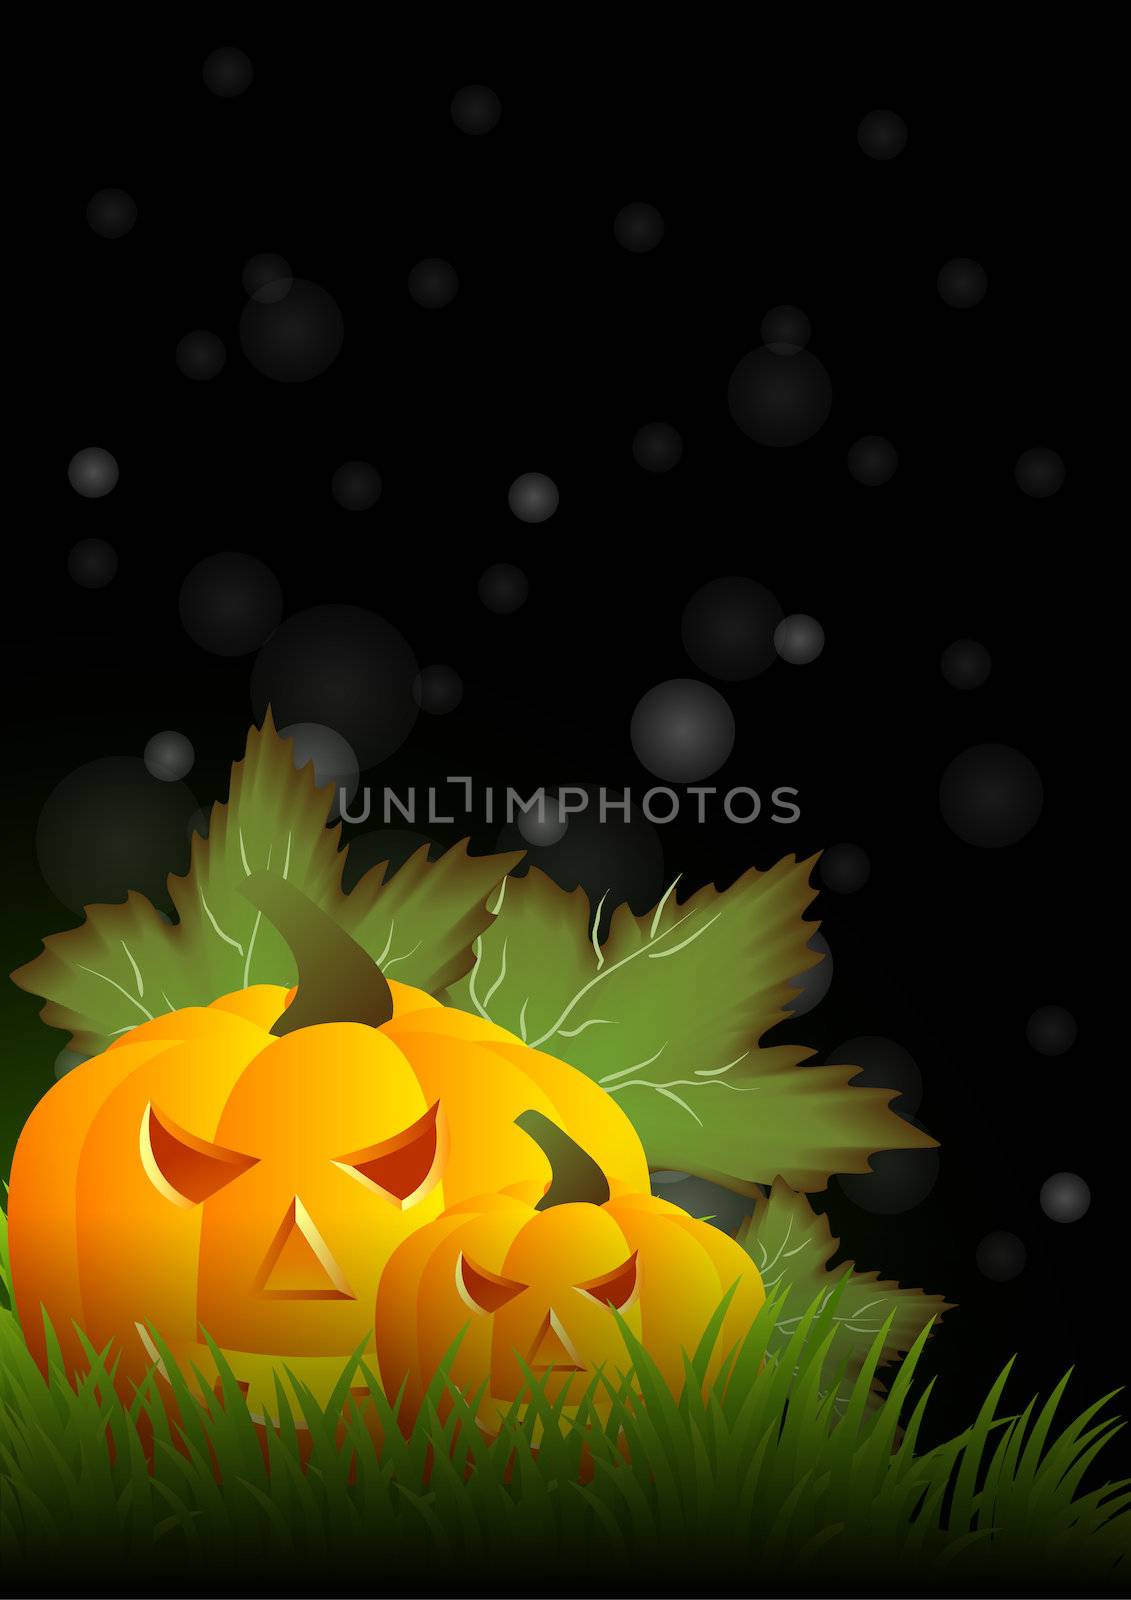 greeting card for Halloween with pumpkins vector illustration